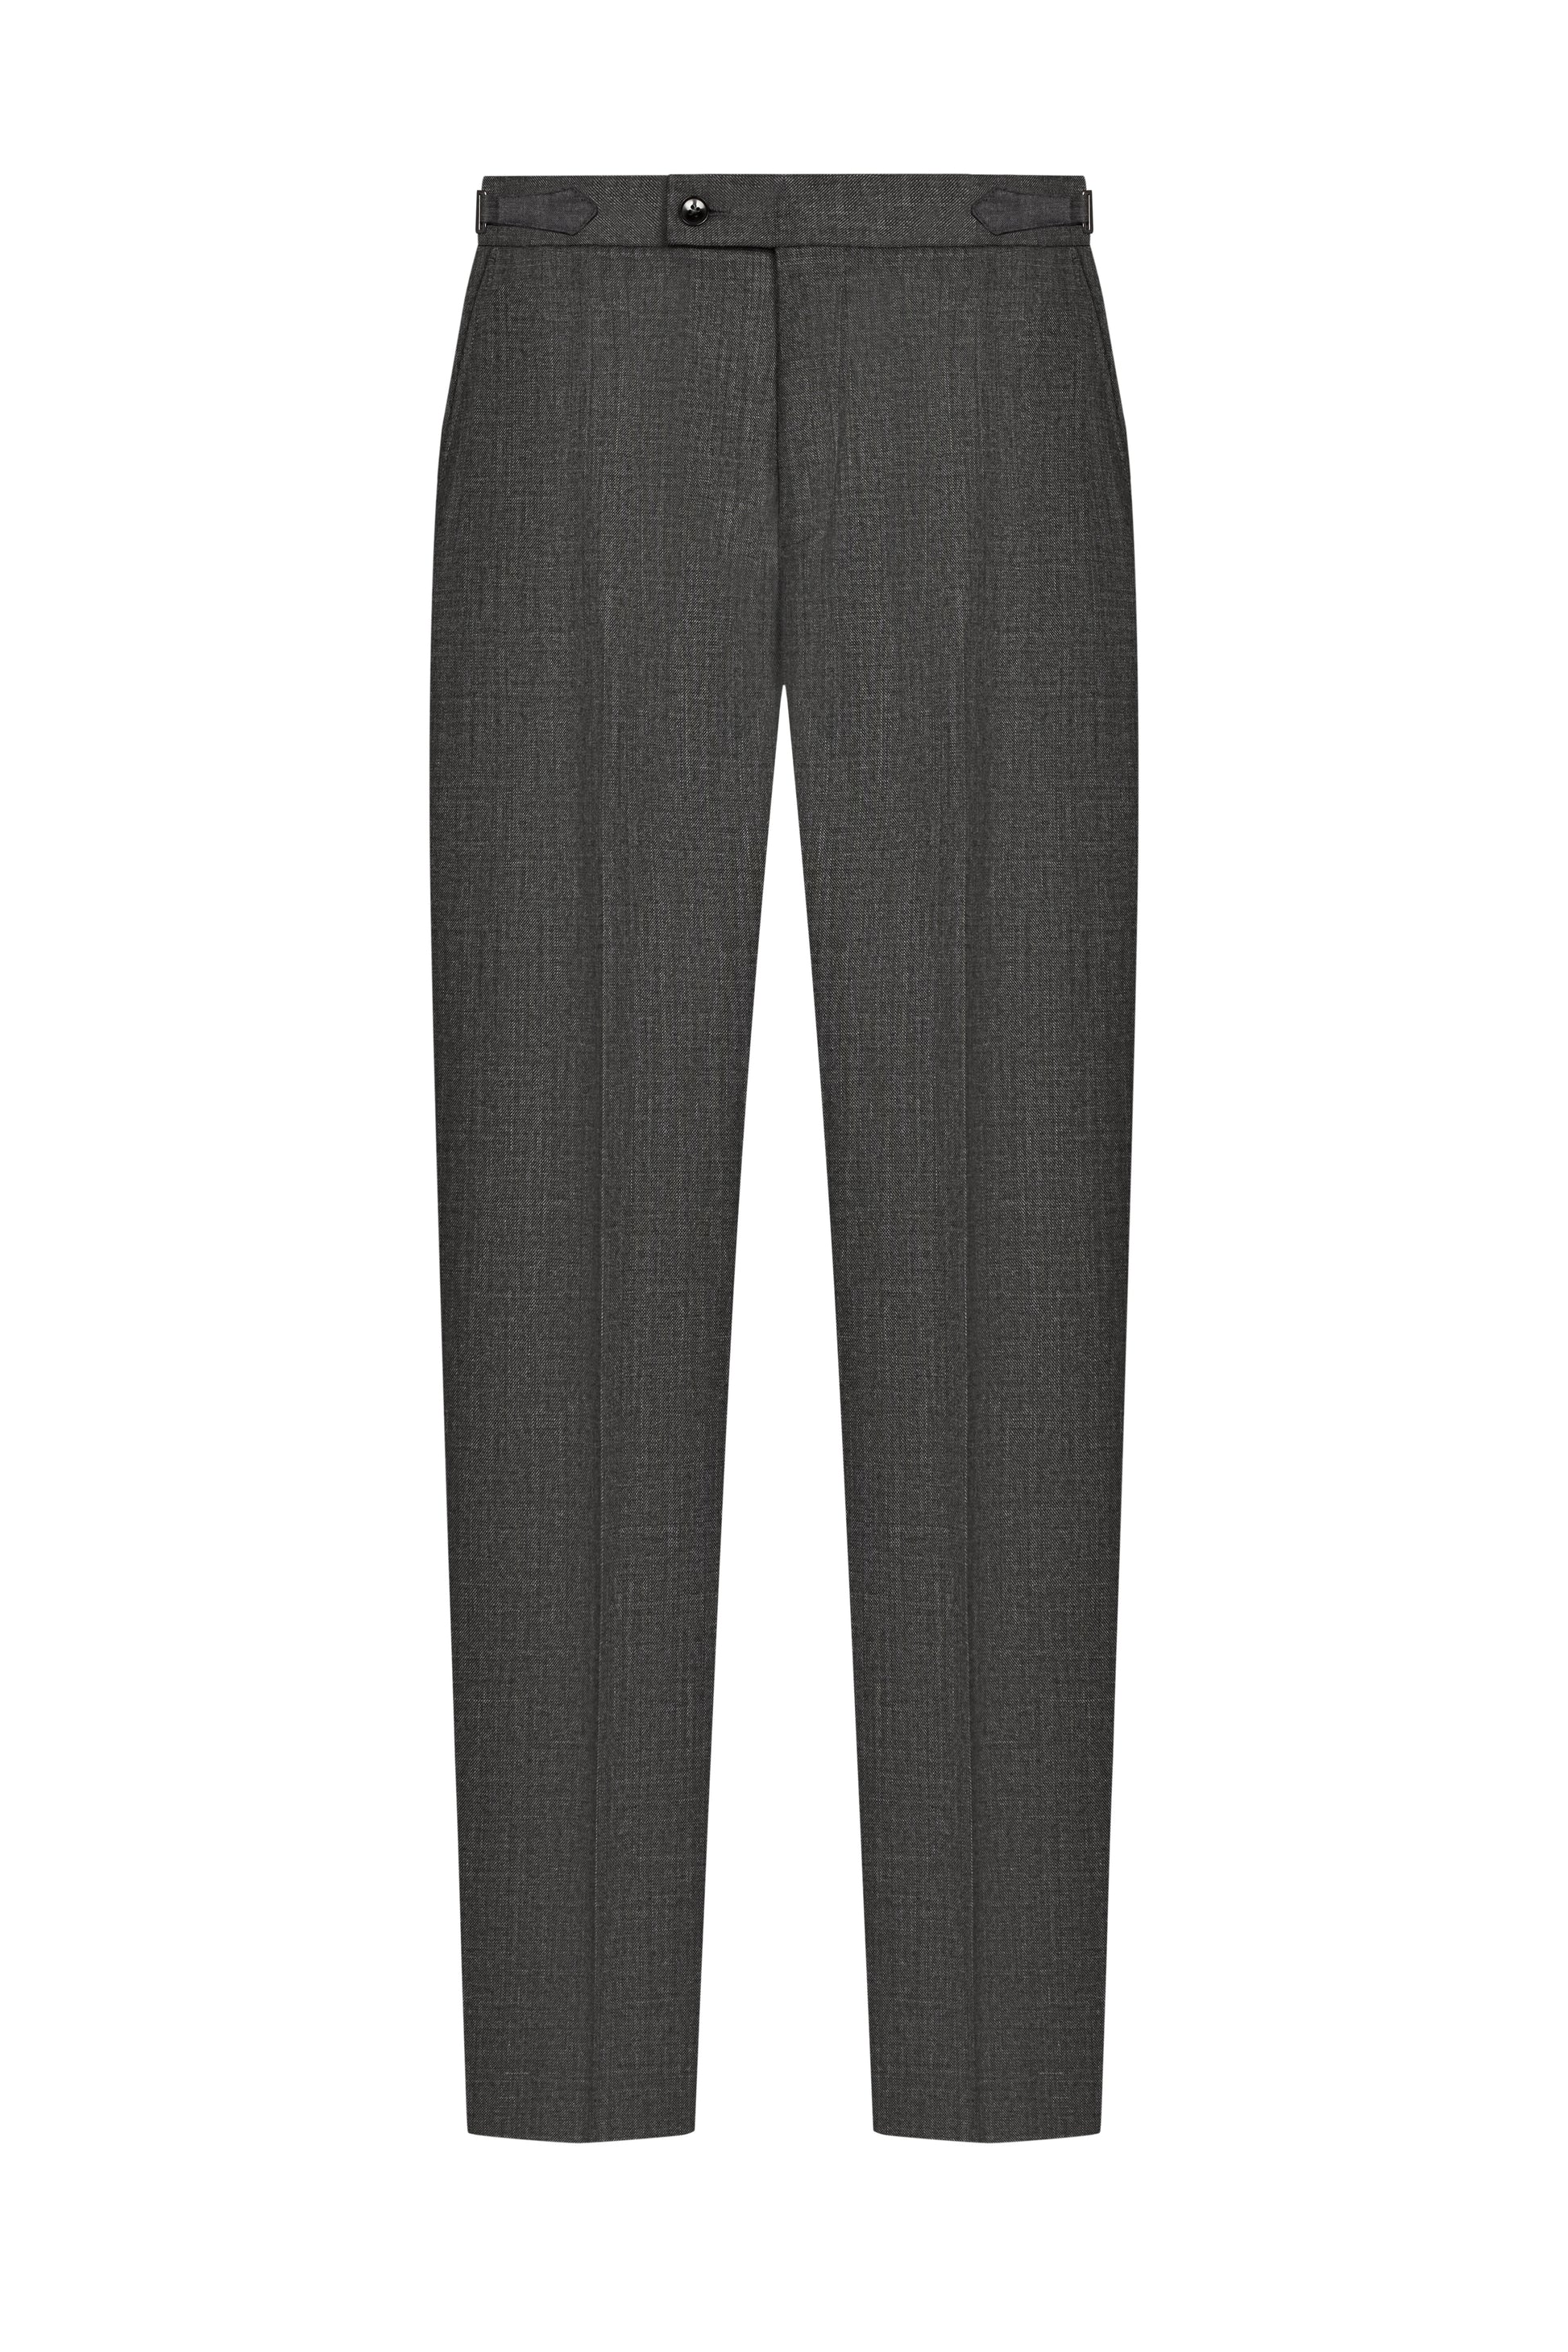 Charcoal Grey Twill Trouser